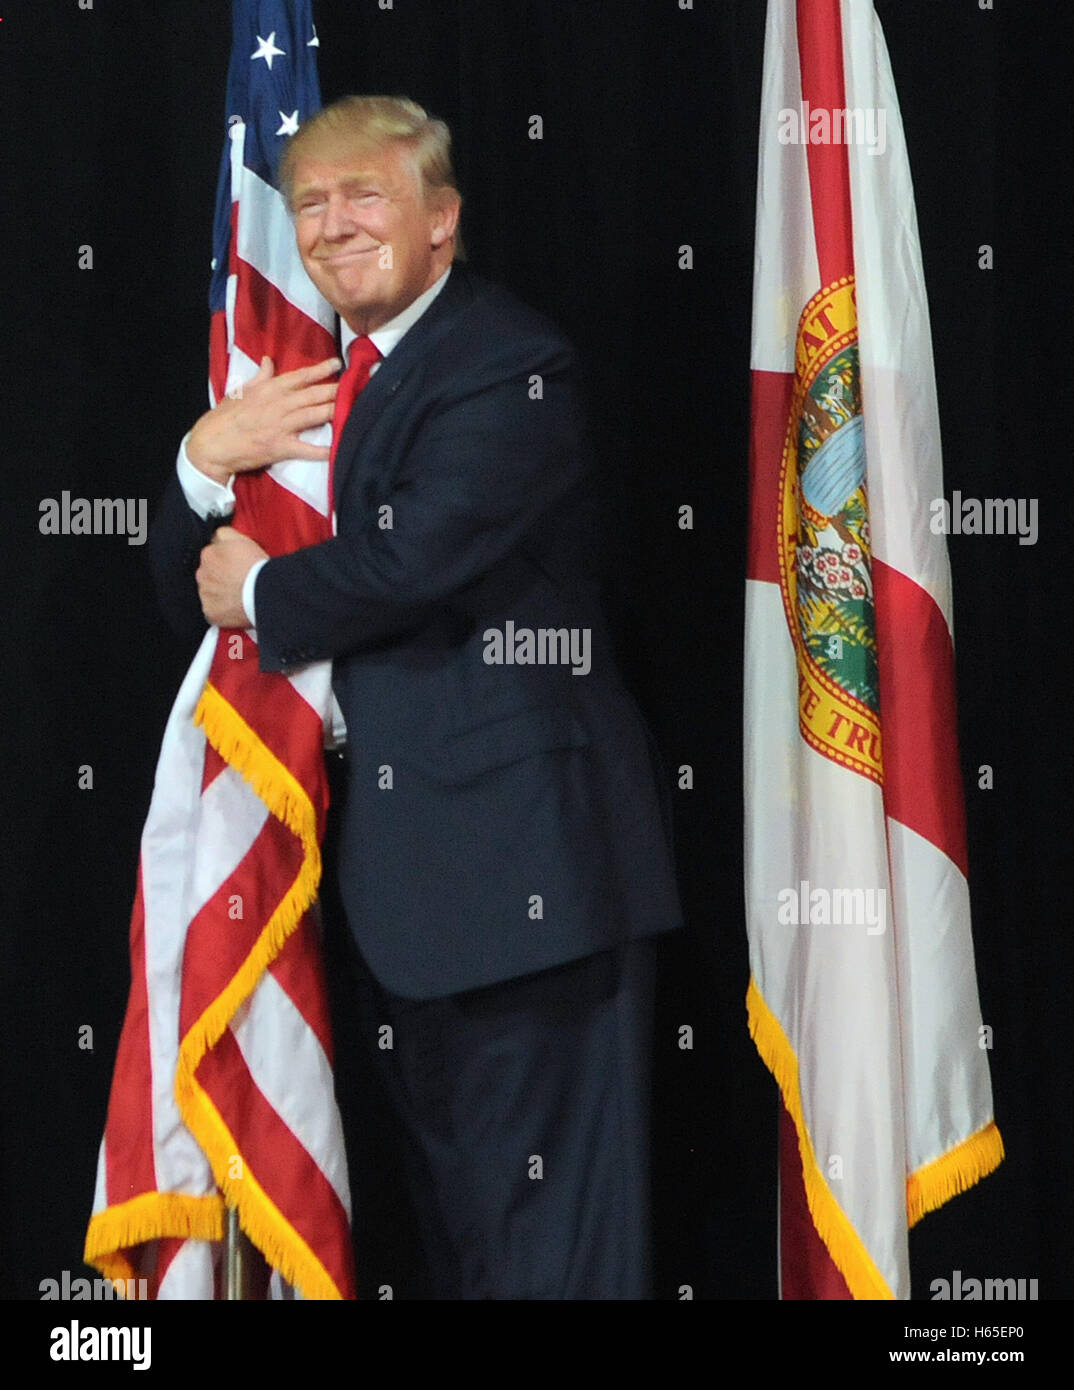 Tampa, Florida, USA. 24th Oct, 2016. Republican presidential nominee Donald Trump hugs an American flag as he takes the stage to speak at a campaign rally at the MidFlorida Credit Union Amphitheatre in Tampa, Florida, the third of five cities Trump is visiting during a two-day campaign swing through Florida. Credit:  Paul Hennessy/Alamy Live News Stock Photo